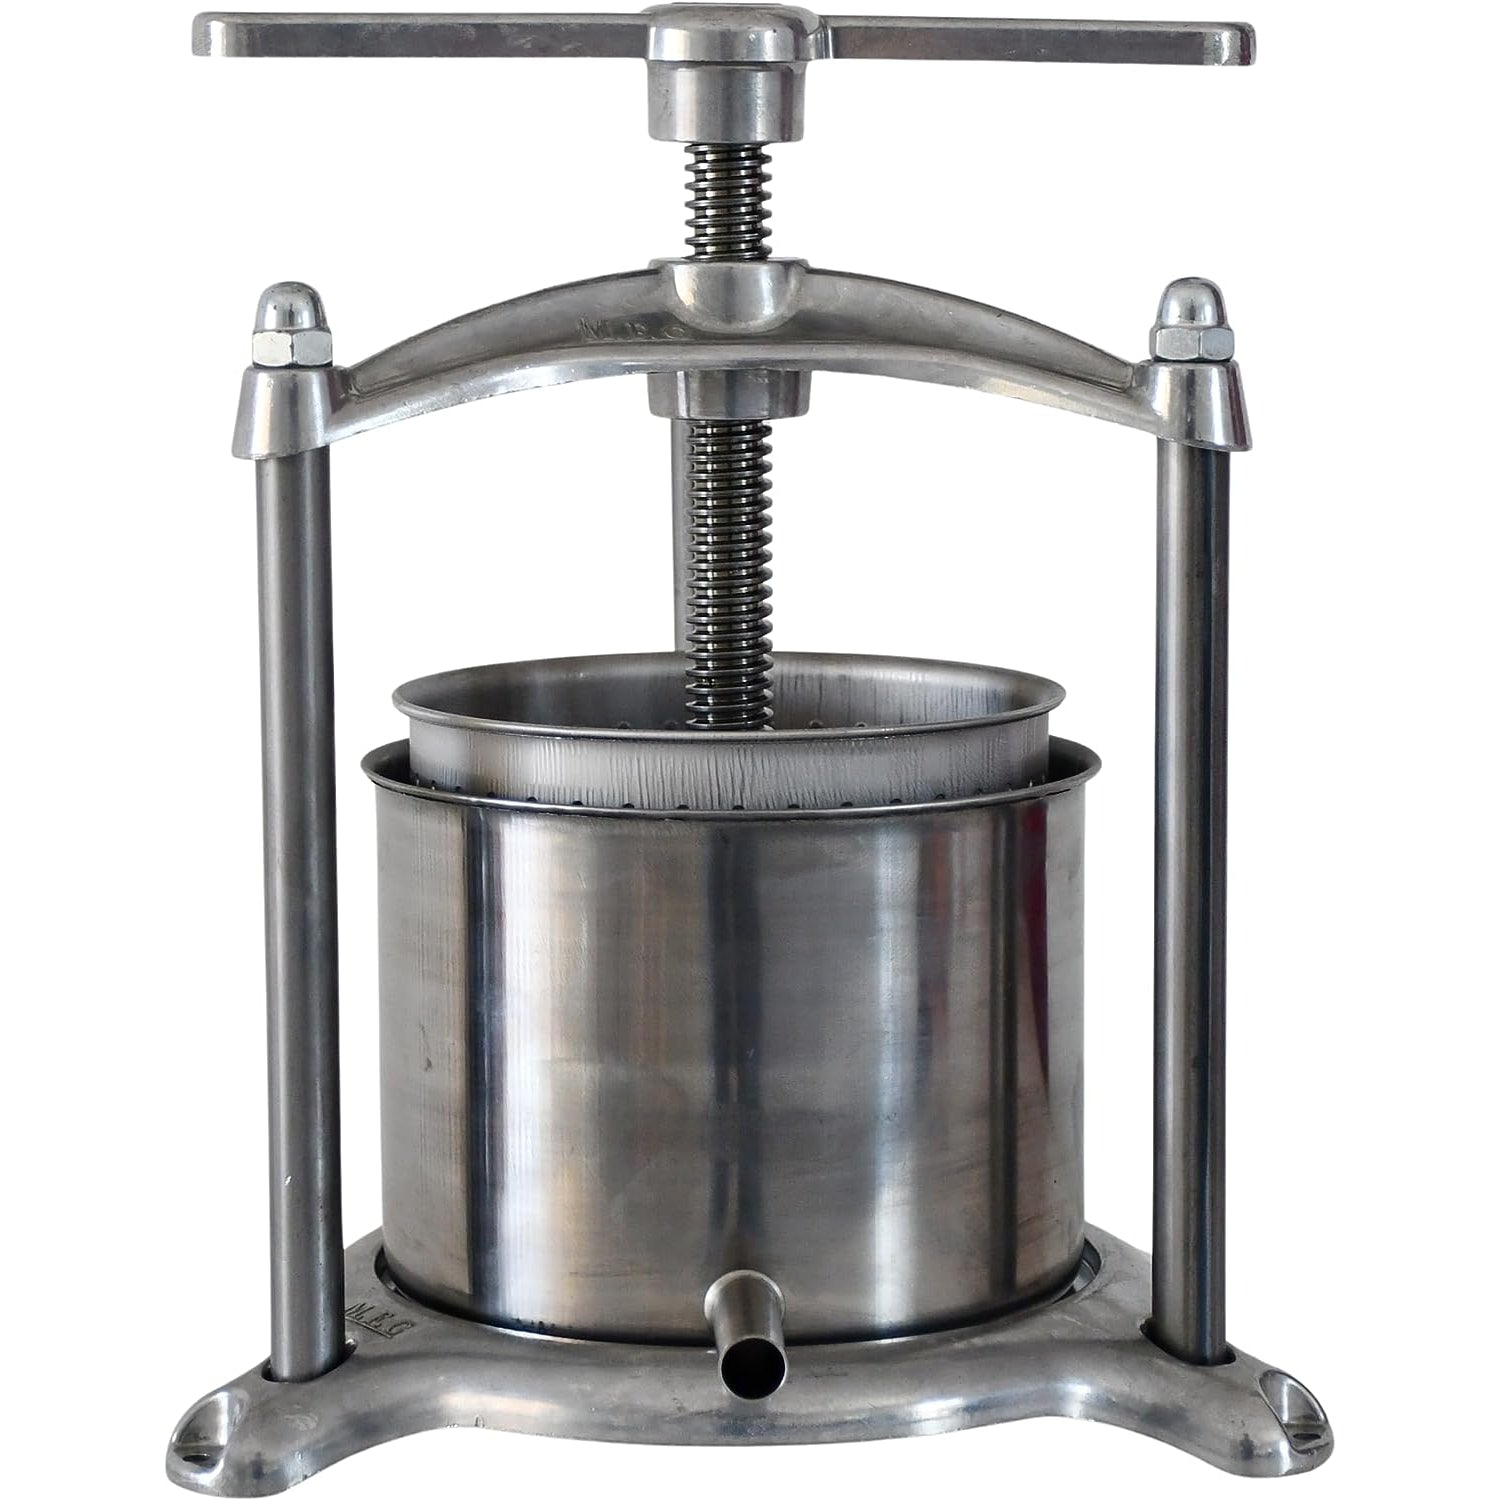 Large Professional Heavy Duty Vegetable Press - Torchietto Made in Italy With Newly Upgraded Posts and Crank